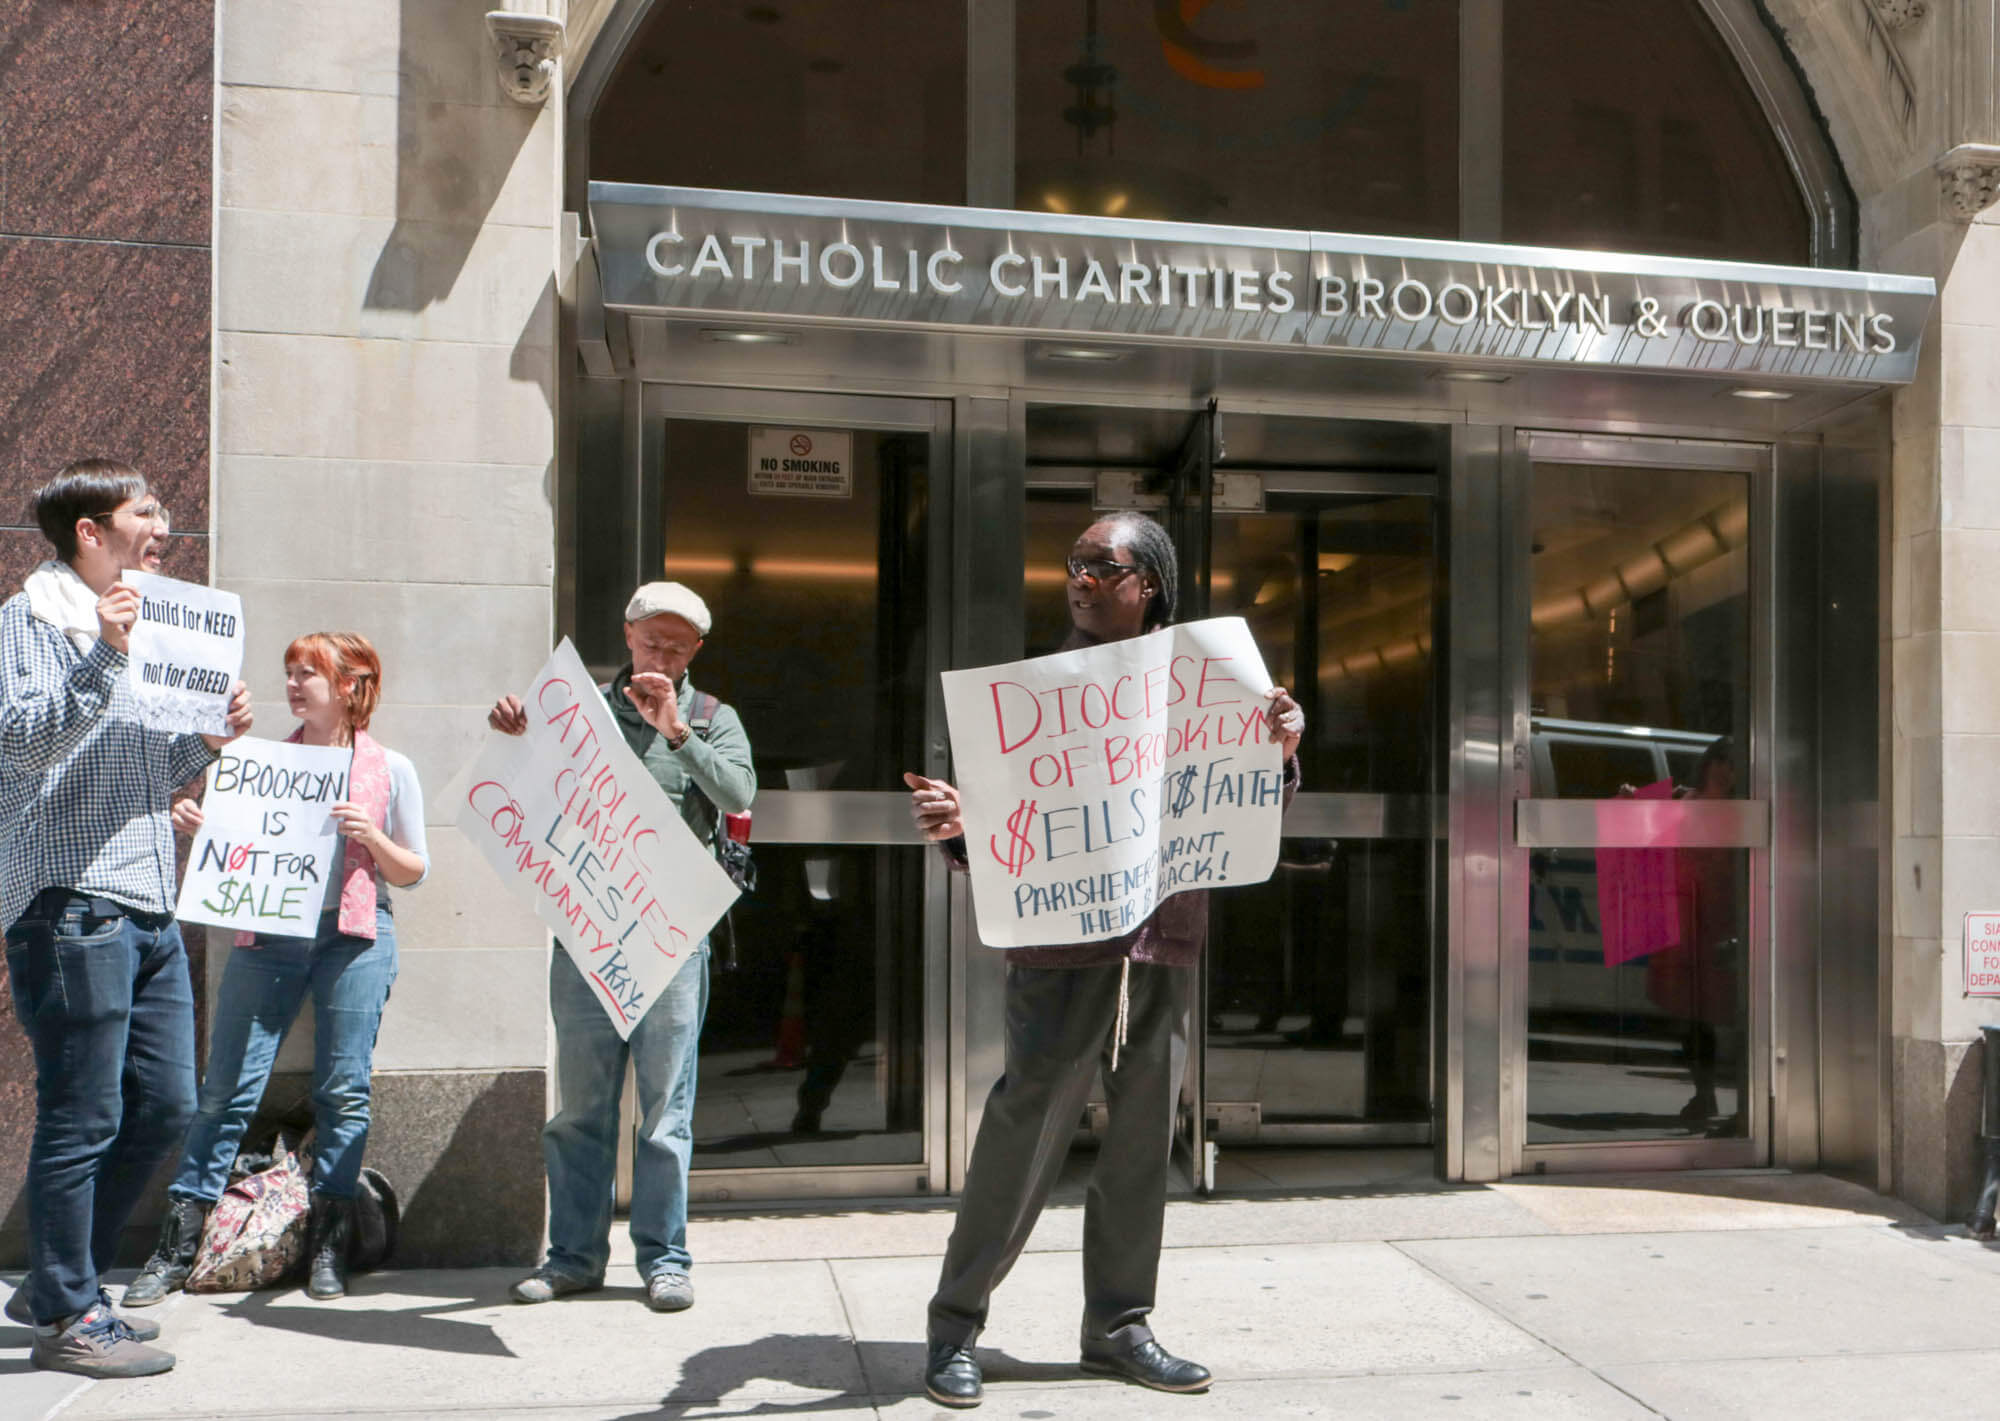 our lady of loreto protest catholic charities